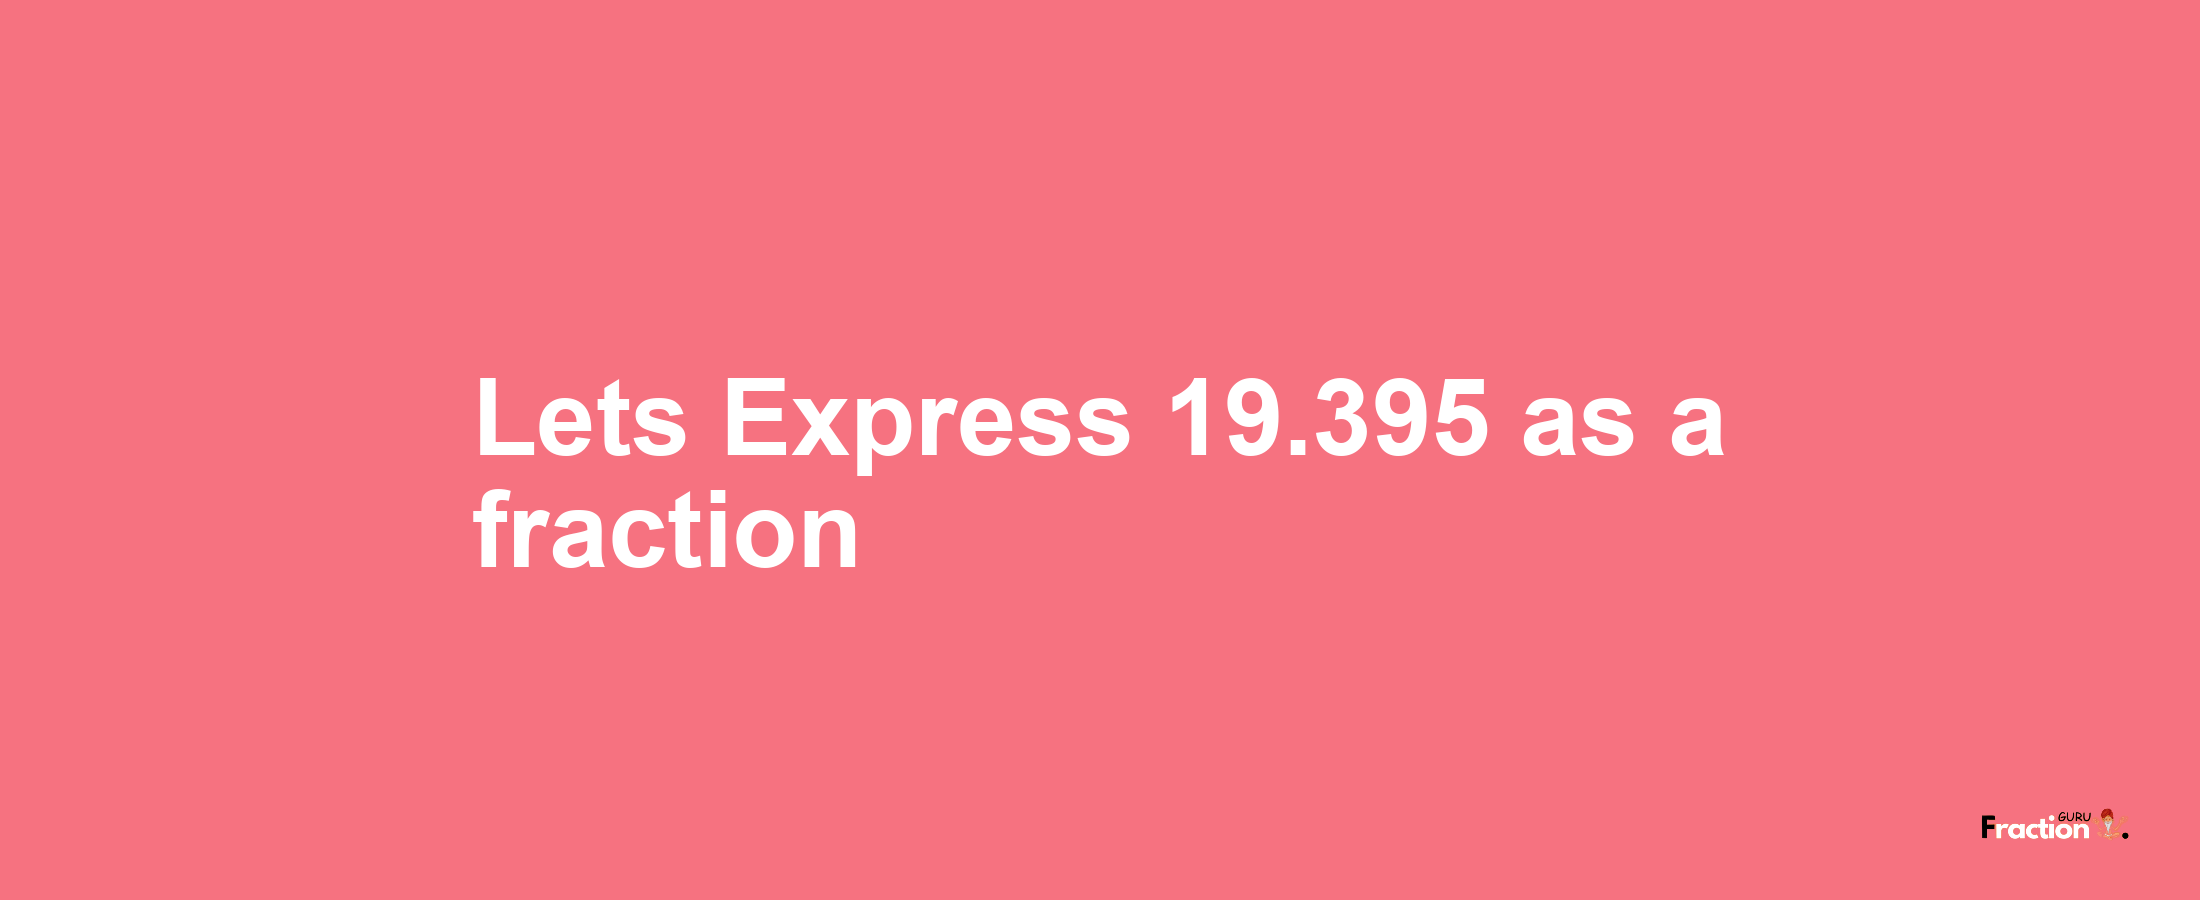 Lets Express 19.395 as afraction